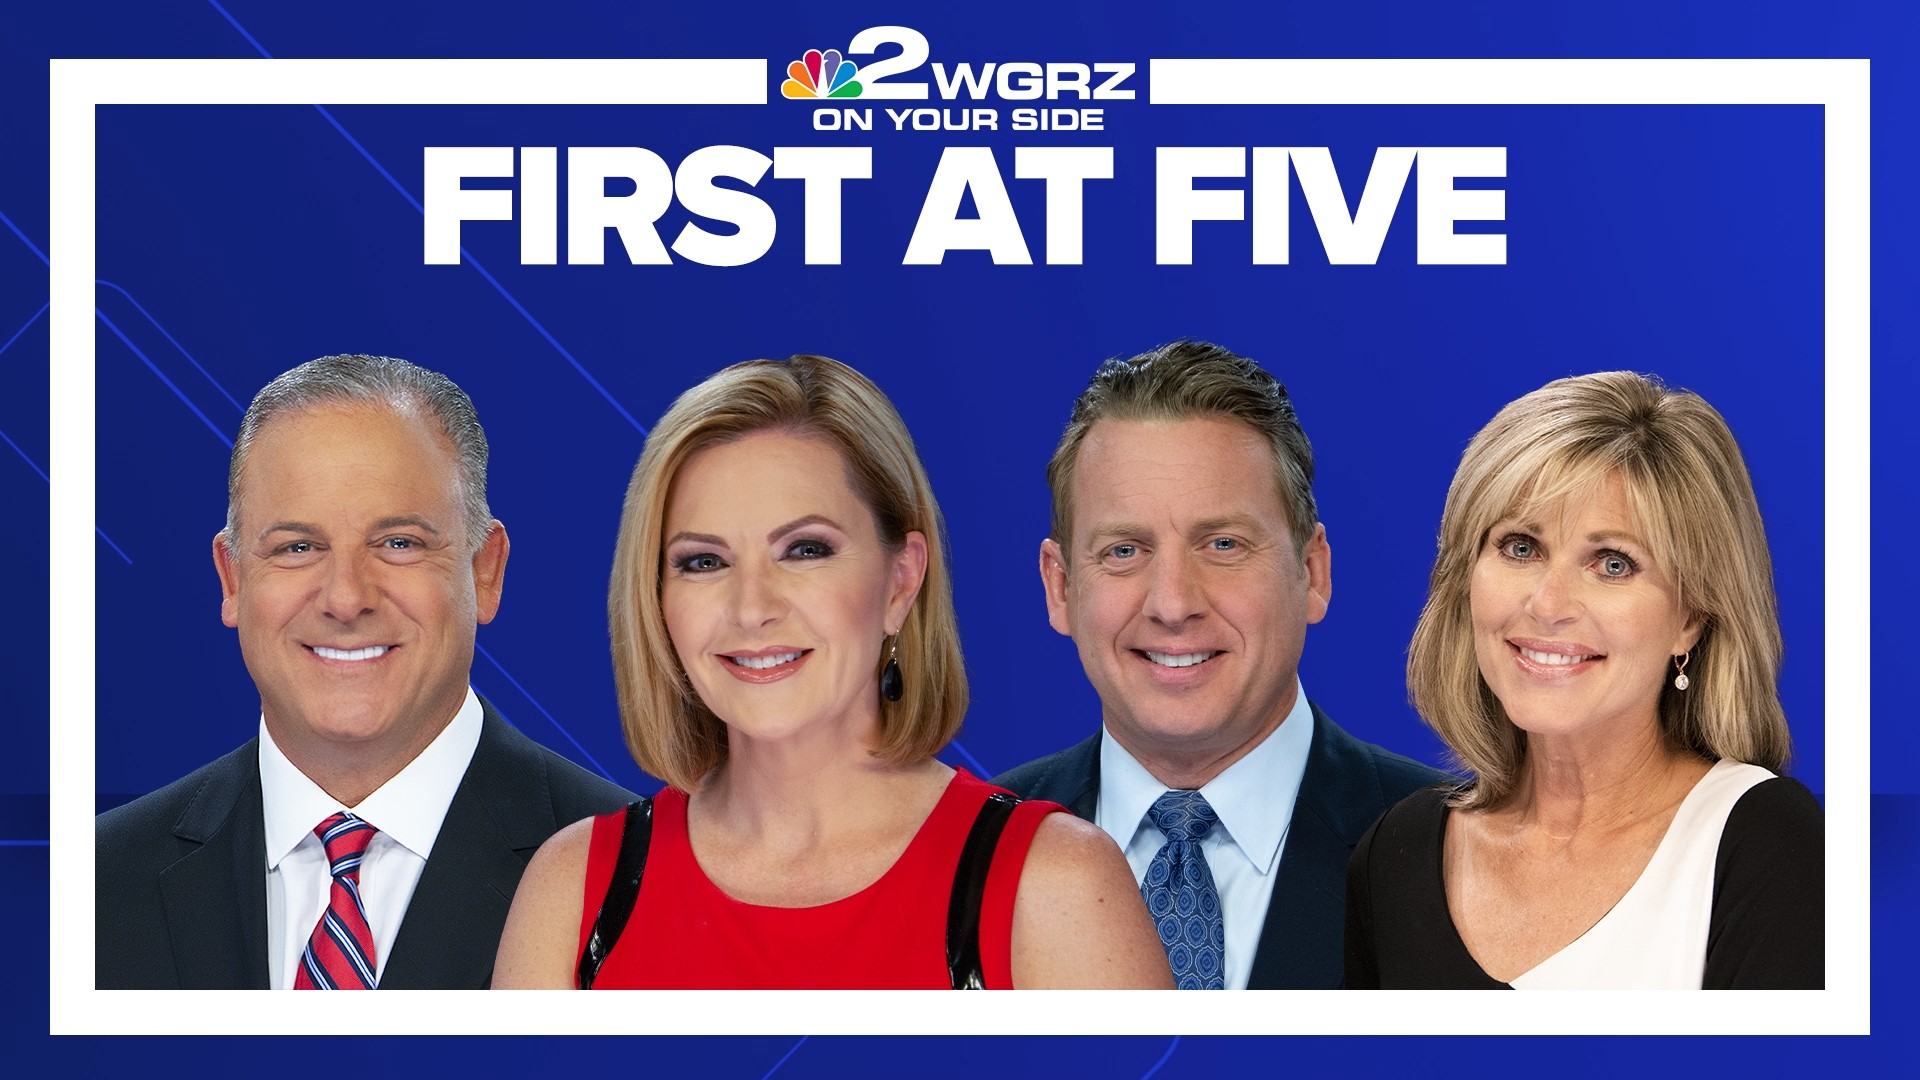 Channel 2 News at 5:30	2 On Your Side speaks live with the day's newsmakers and takes a closer look at the issues affecting Western New Yorkers.
